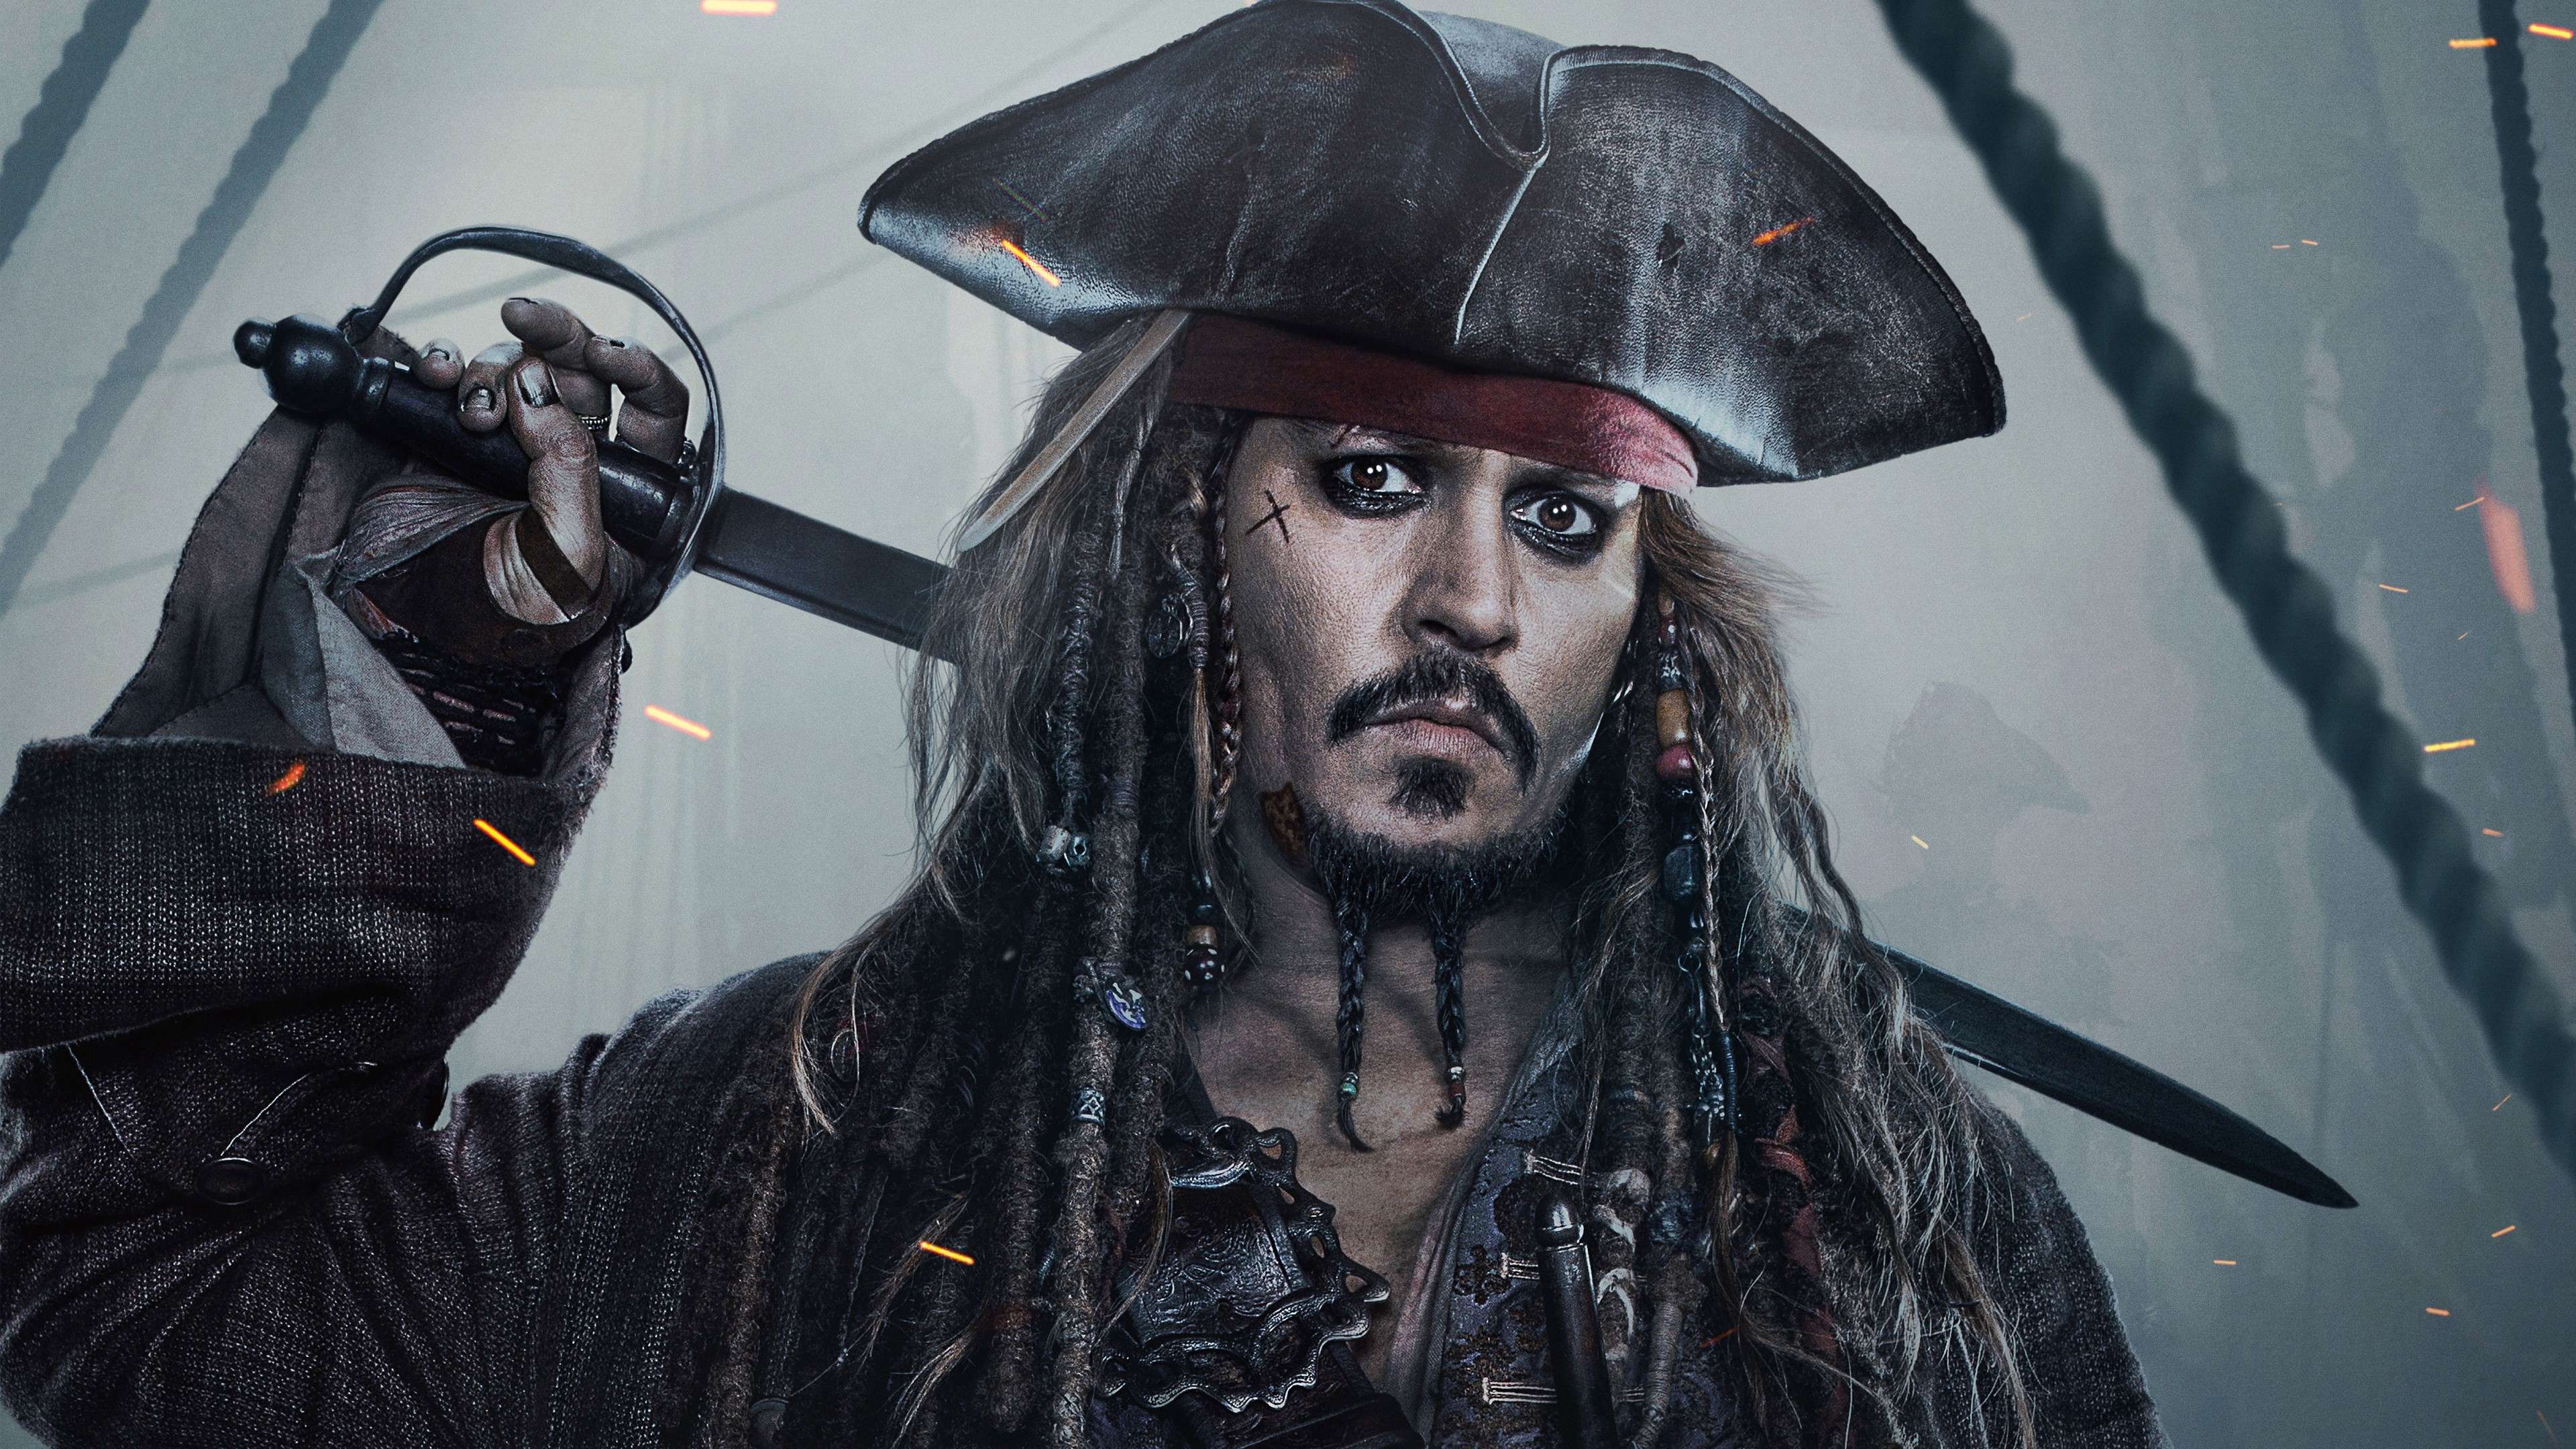 Gore Verbinski Says Many Thought Pirates of the Caribbean Would Be A Disaster